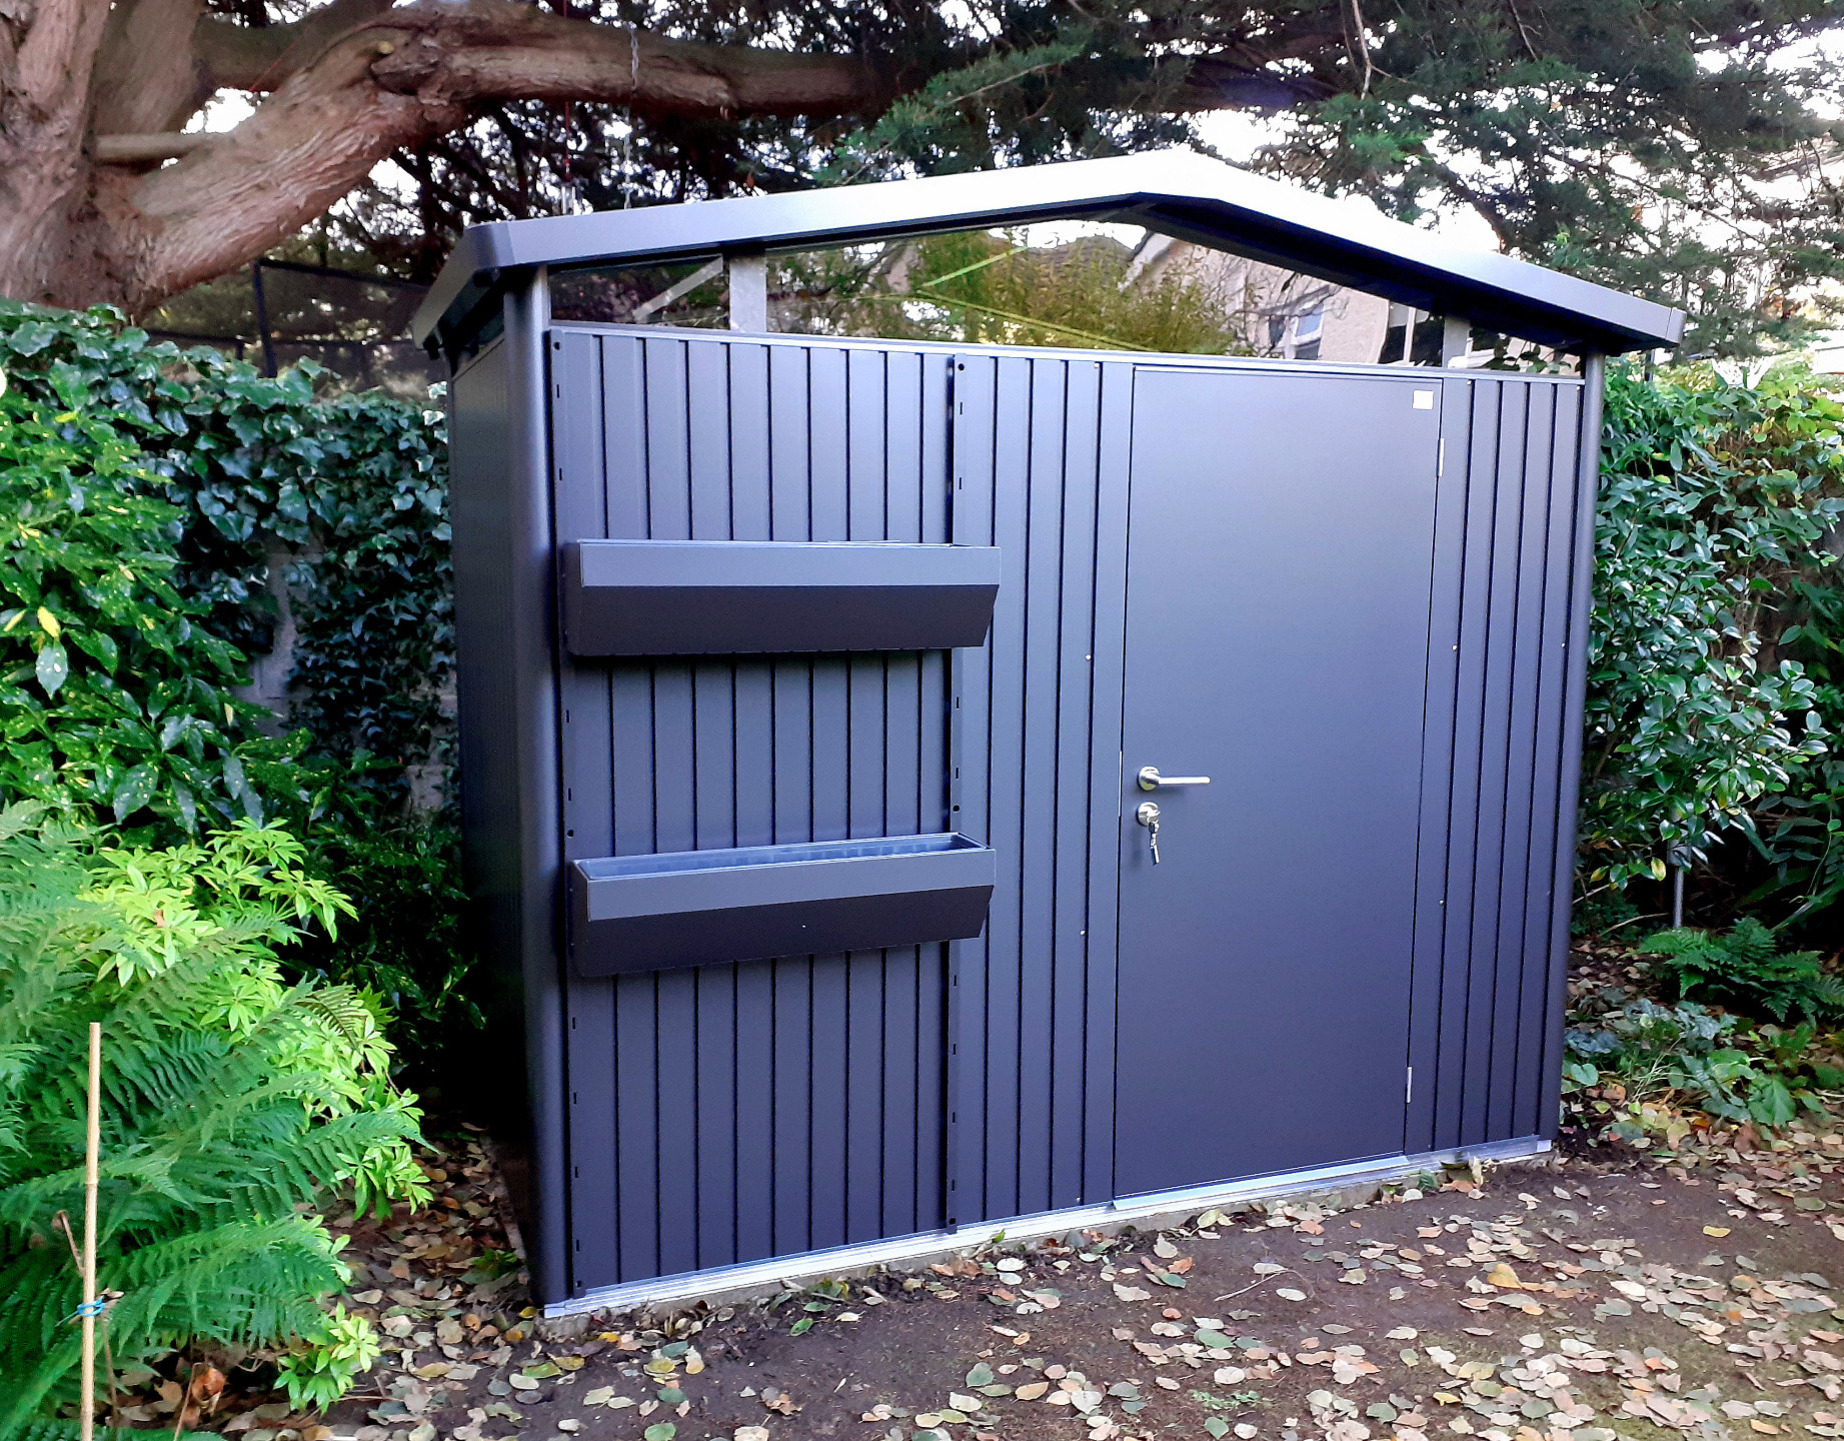 The Biohort Panorama P1 Garden Shed in metallic dark grey with optional accessories including aluminium floor panels, FloraBord Planter, Folding table, LED light |`Supplied + Fitted in Rathfarnham, Dublin 14by Owen Chubb Tel 087 - 2306 128 | #1 for Biohort in Ireland